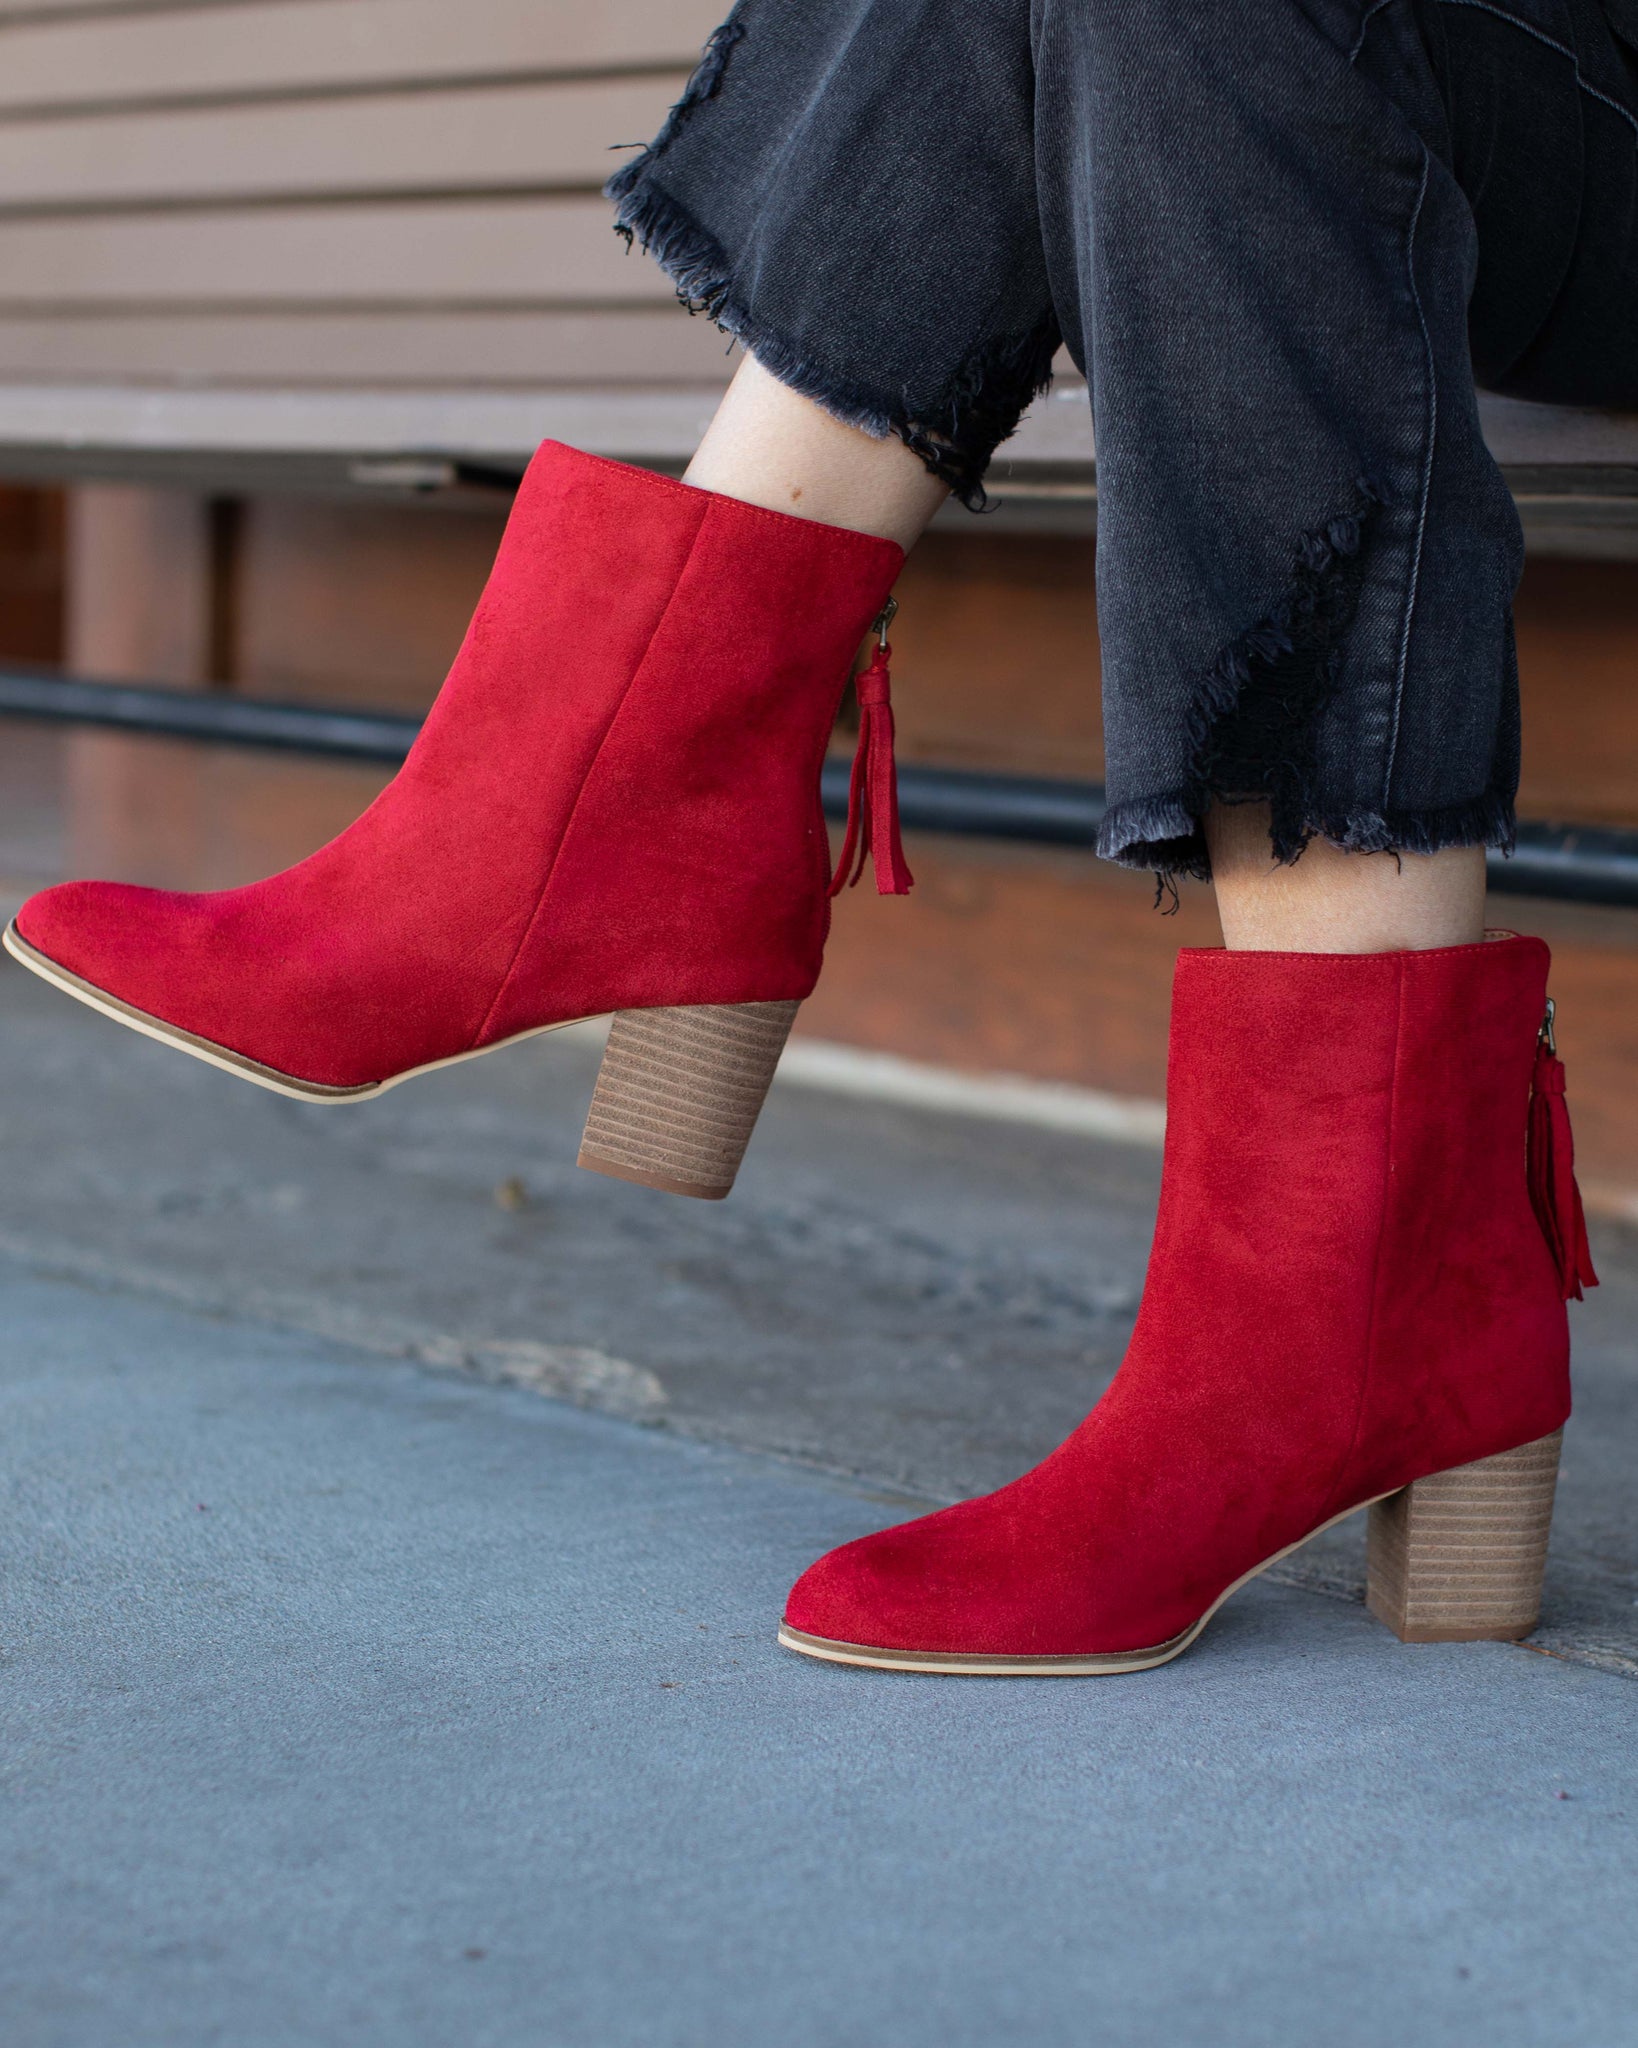 BOUJEE HEY GIRL BOOT BY CORKYS - RED - Salty Lime Boutique